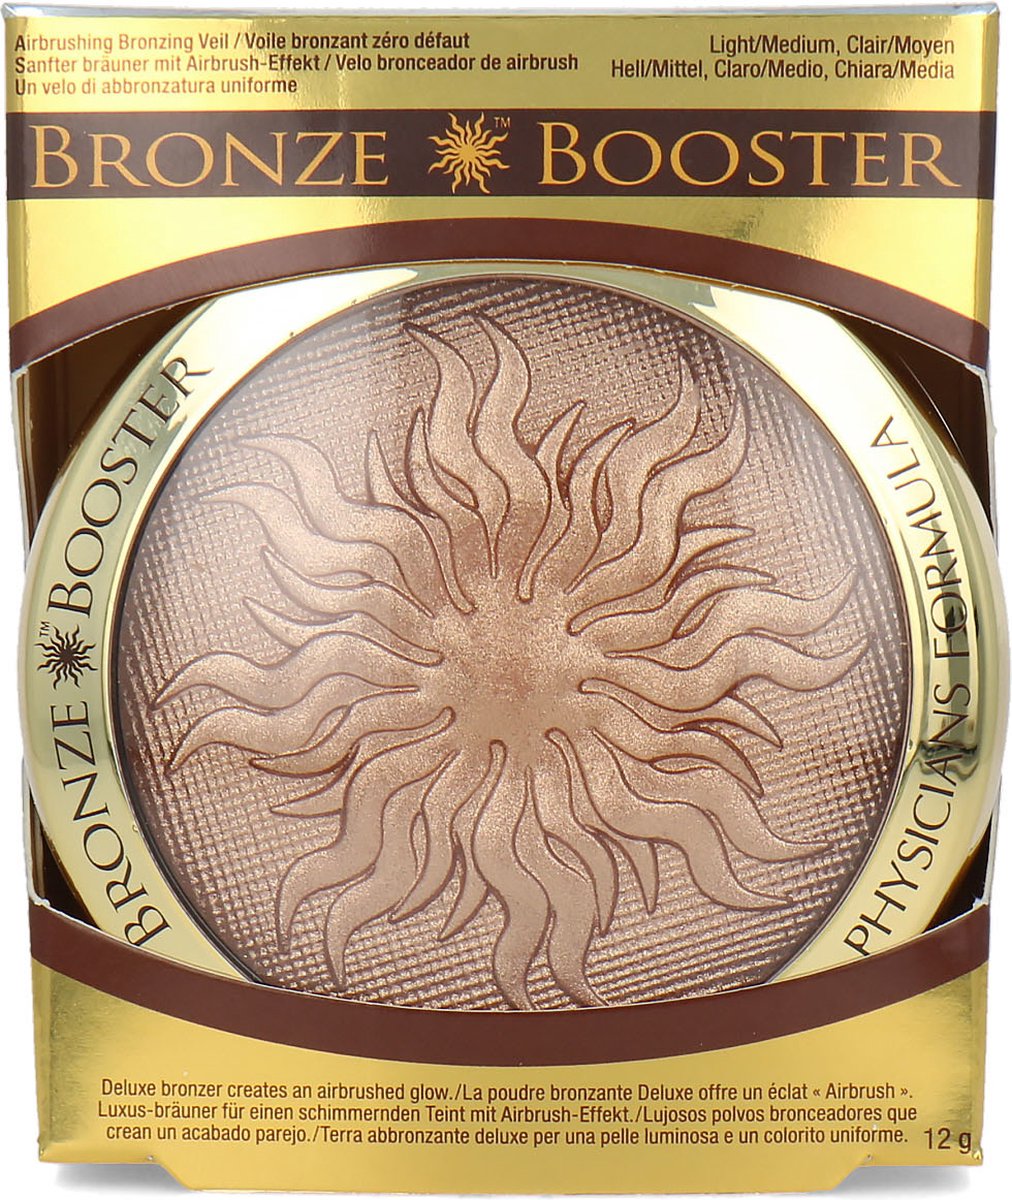 Physicians Formula Bronze Booster Glow-Boosting Airbrushing Bronzing Veil Deluxe Edition - 7853 Light to Medium